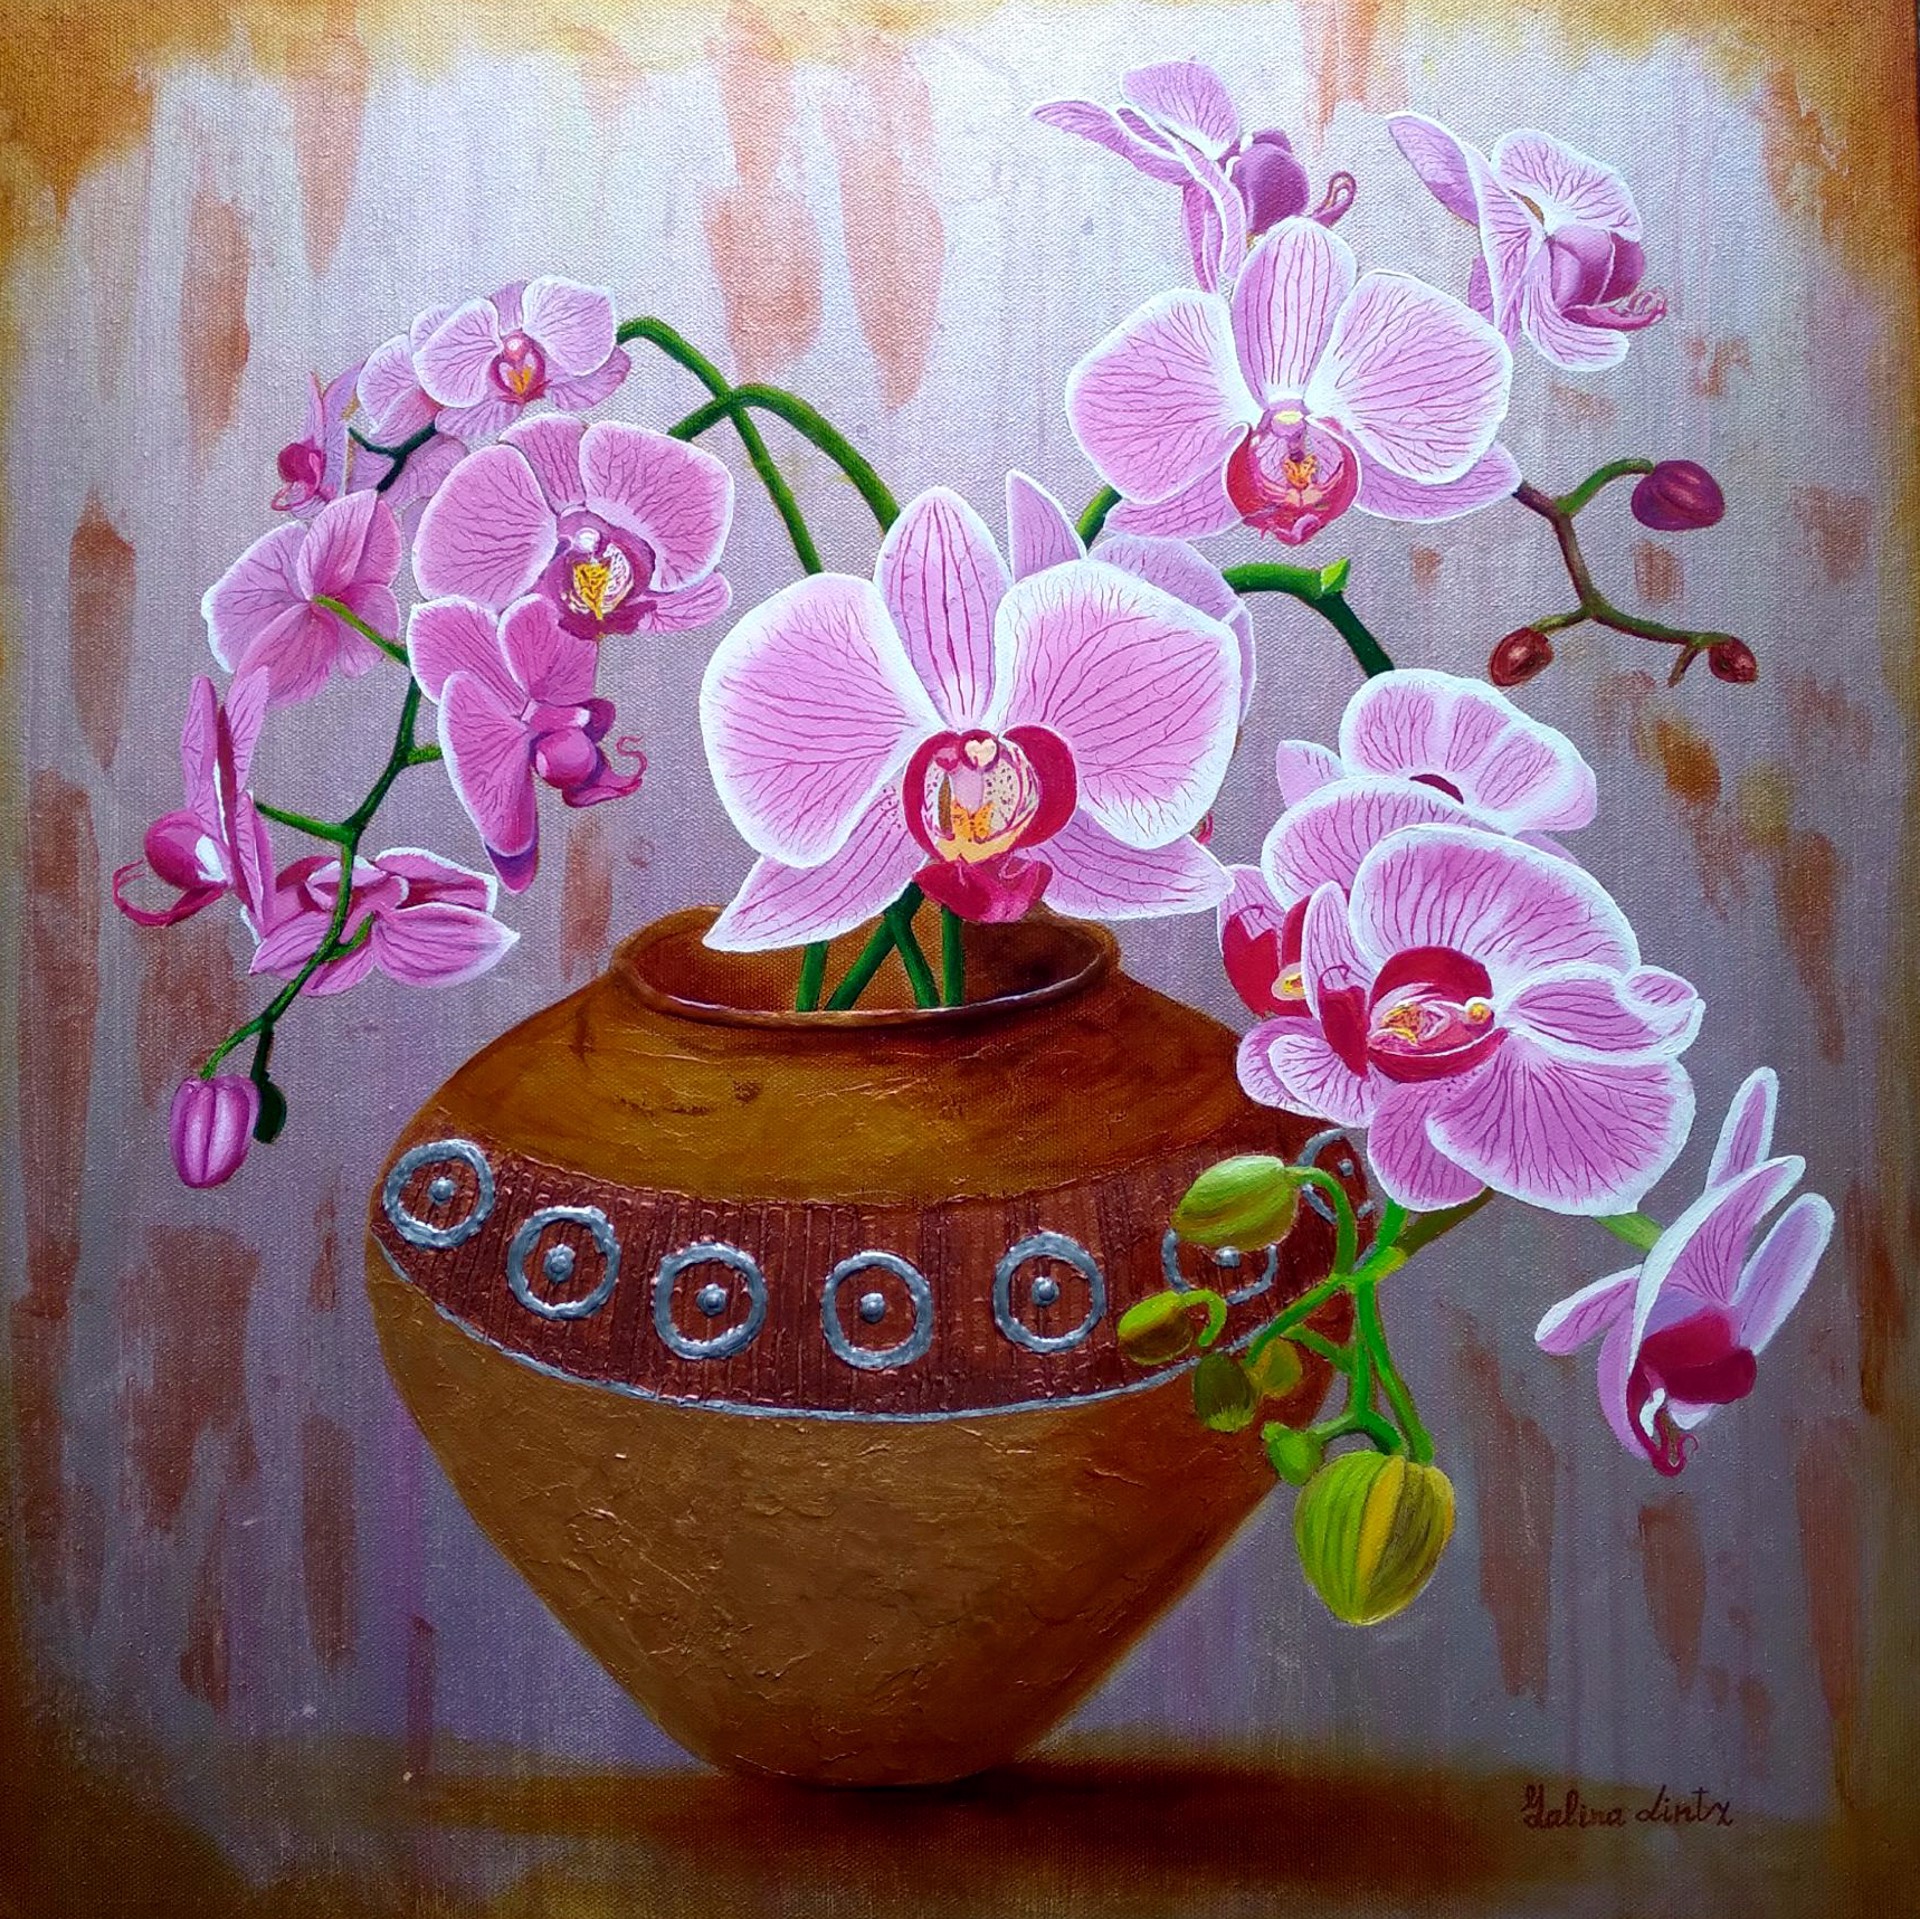 Orchids in Vase by Galina Lintz